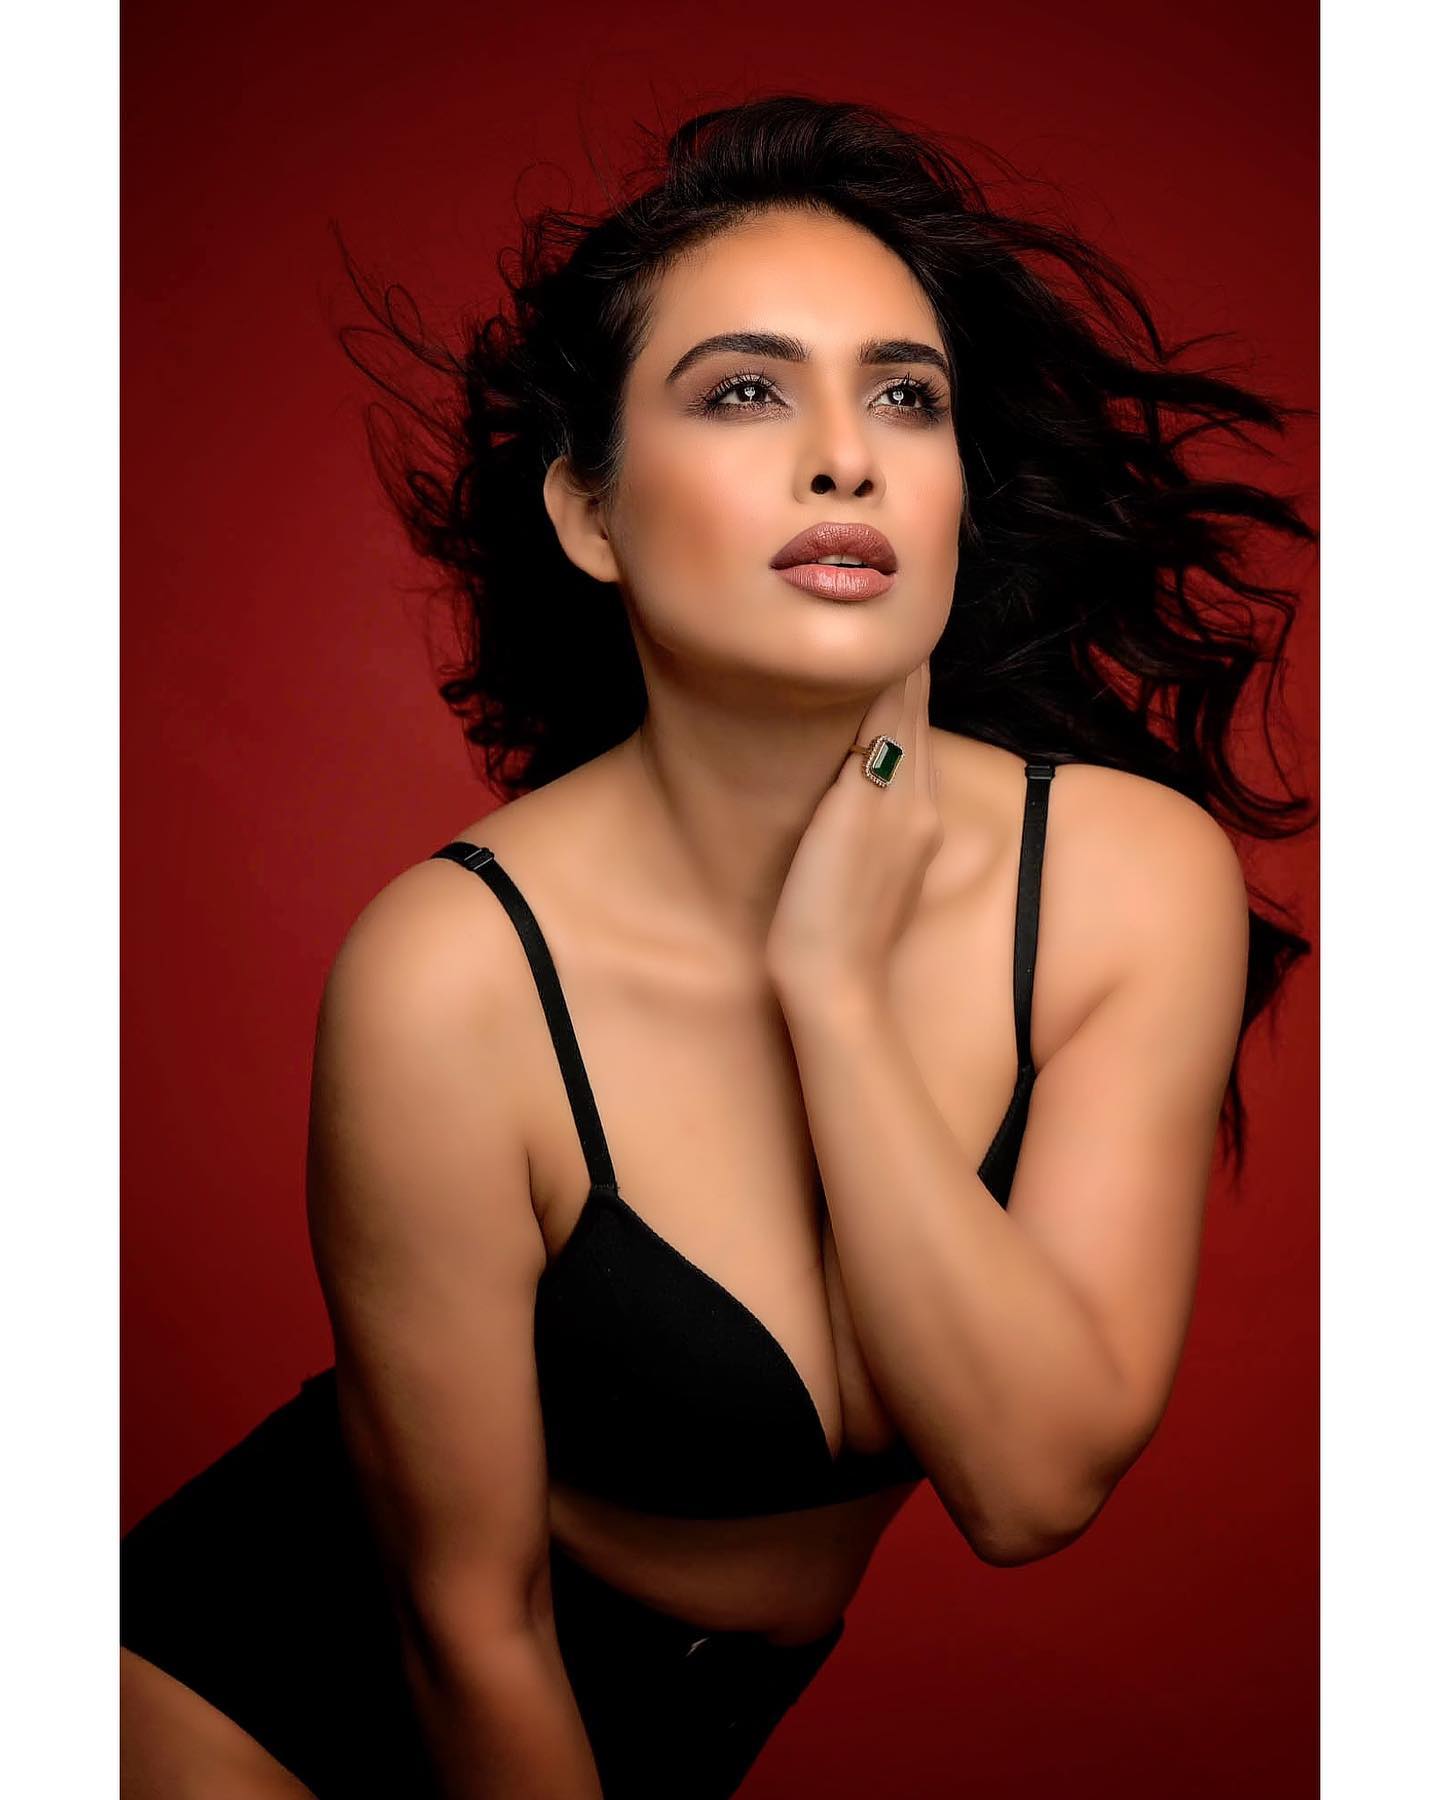 Neha Malik drops a sultry photo from her magazine cover shoot.